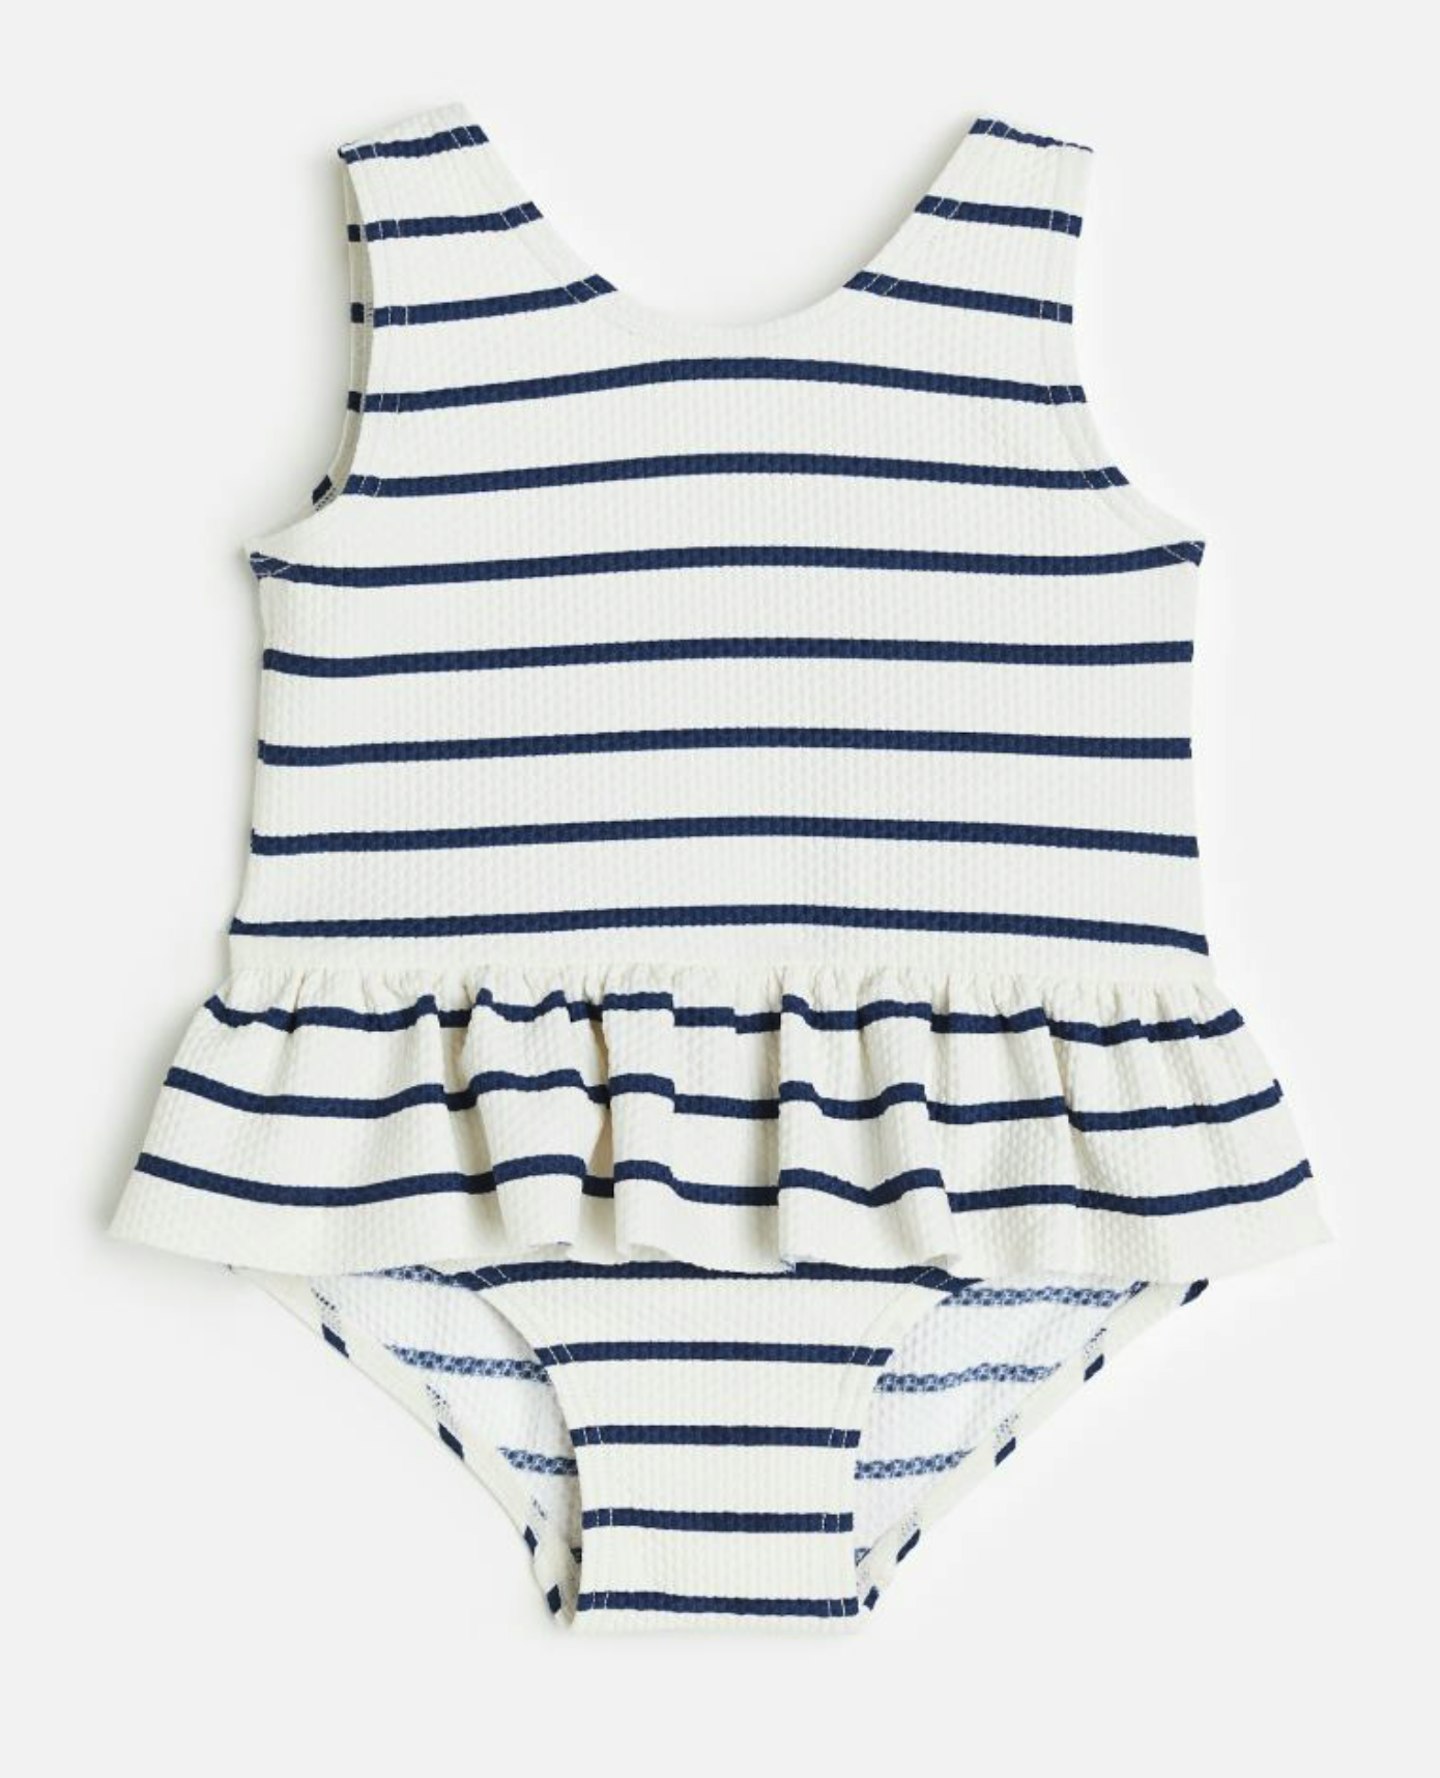 The Best Matching Family Swimwear For Your Next Summer Holiday